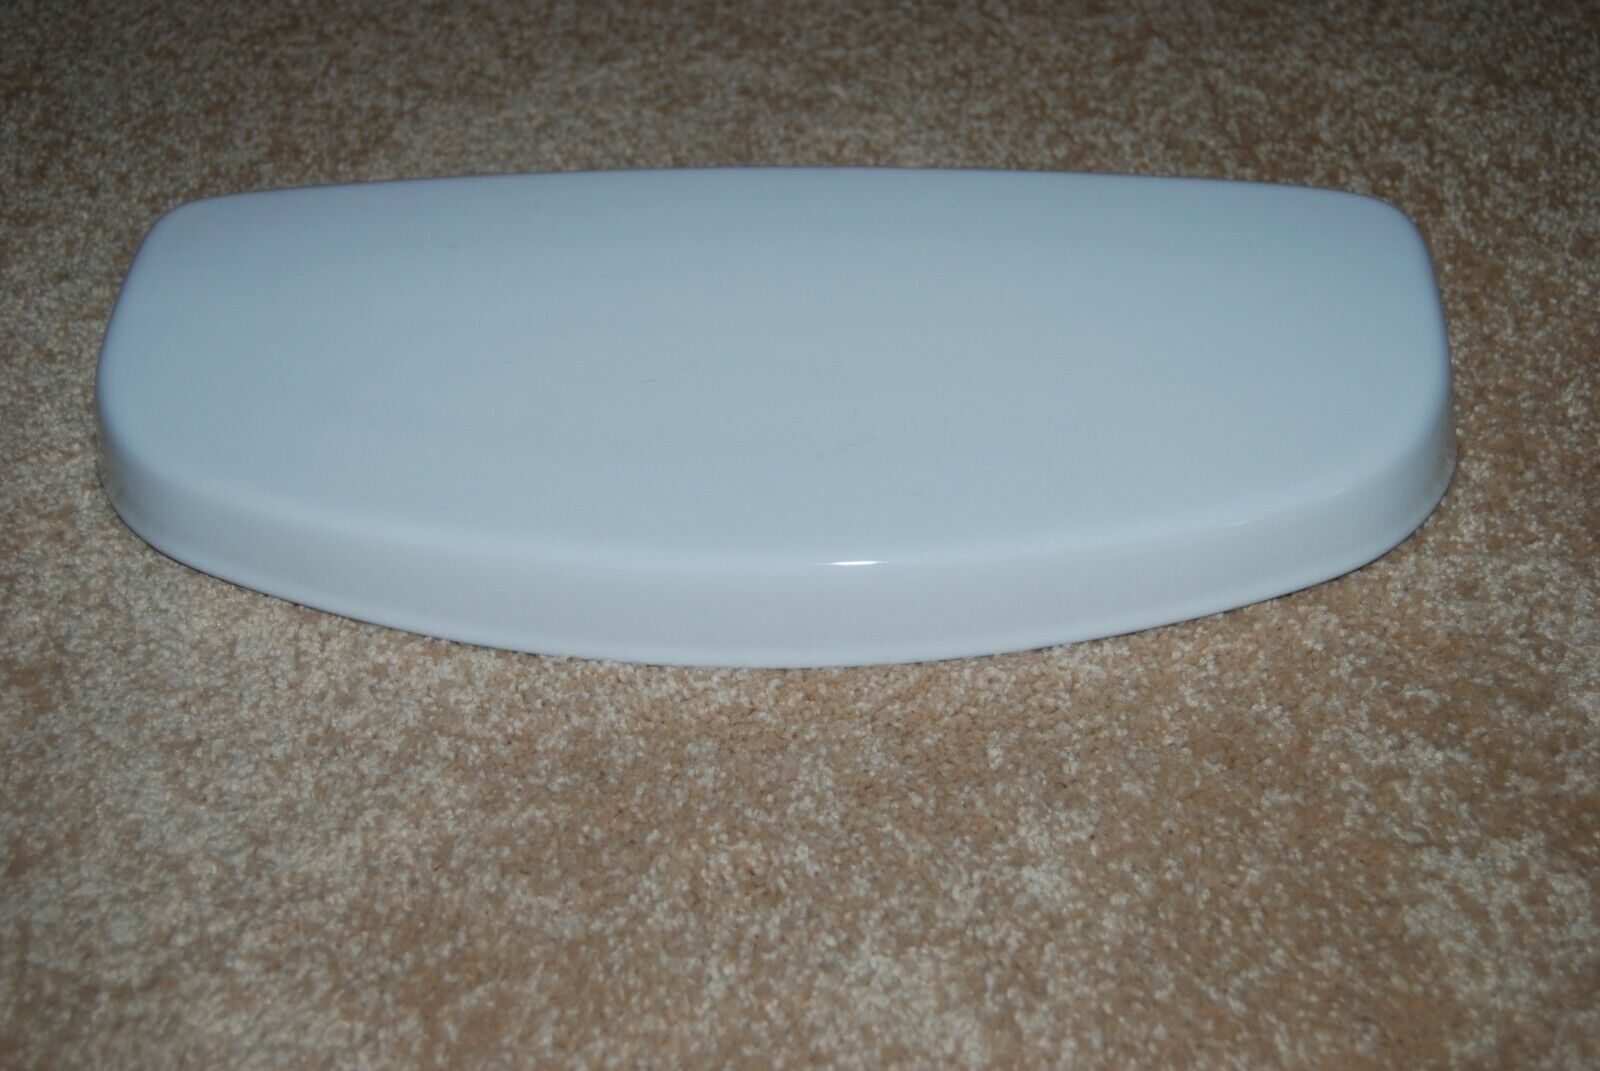 Toto ST604 White Ultramax II Toilet Tank Lid  - EX. CONDITION, S